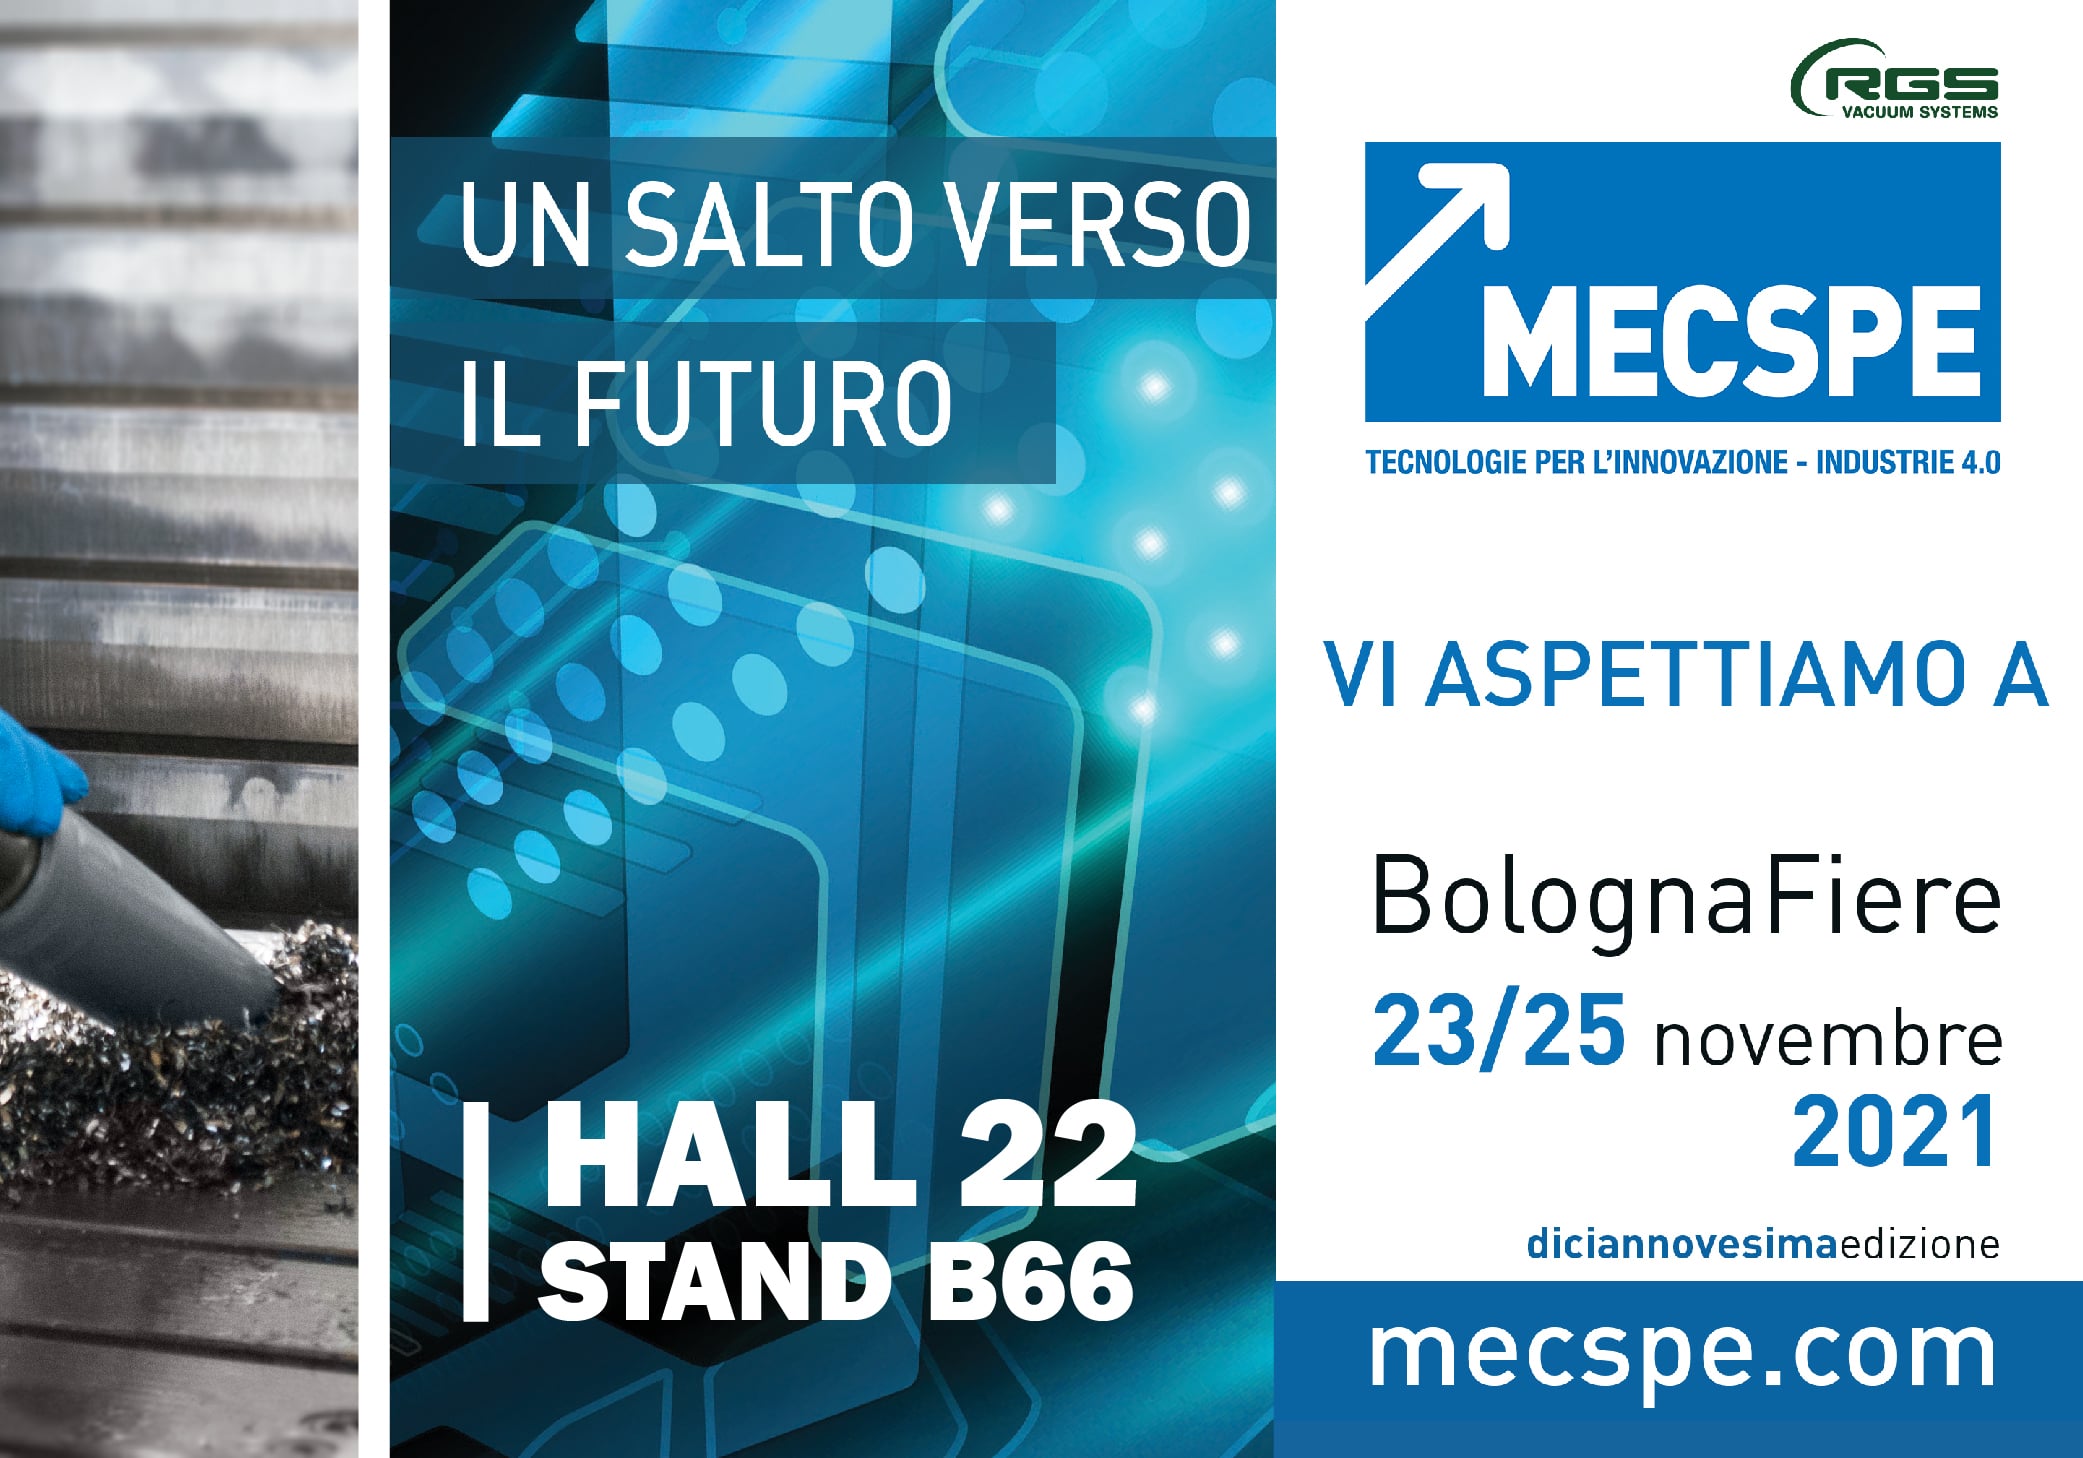 We look forward to seeing you at MECSPE 2021